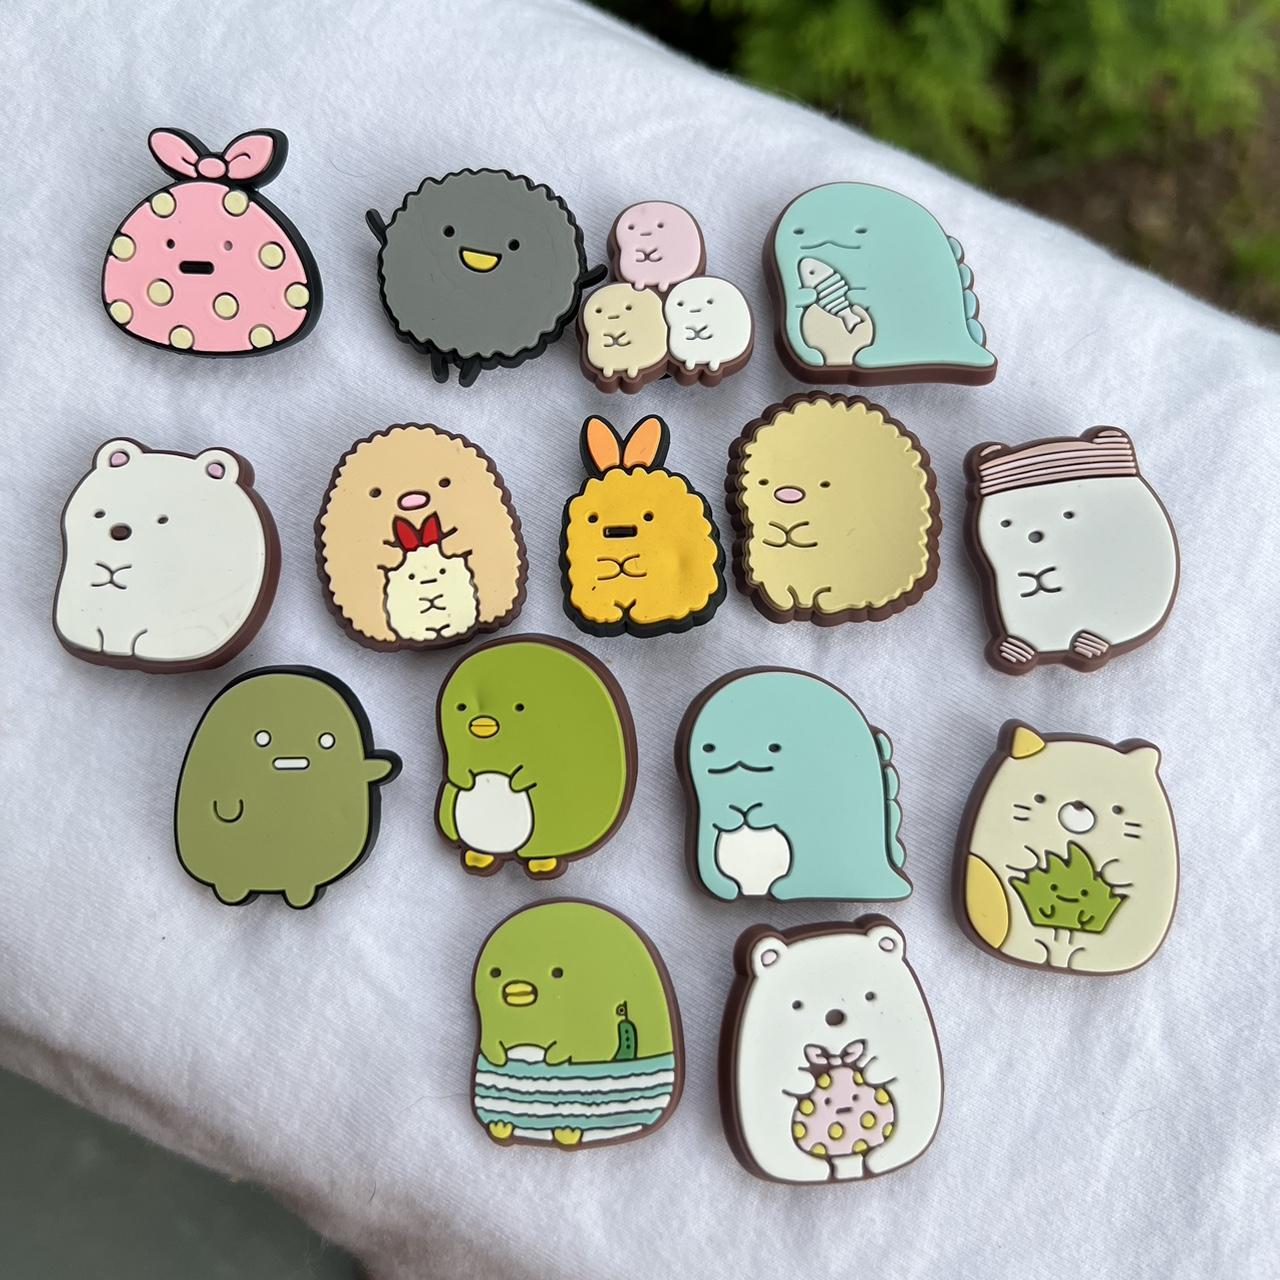 DIY Cartoon Cute Croc Charms Designer Fashion Quality Anime Croc Charms  Lovely Furry Doll Shoe Charms for Croc Luxury All-match - AliExpress